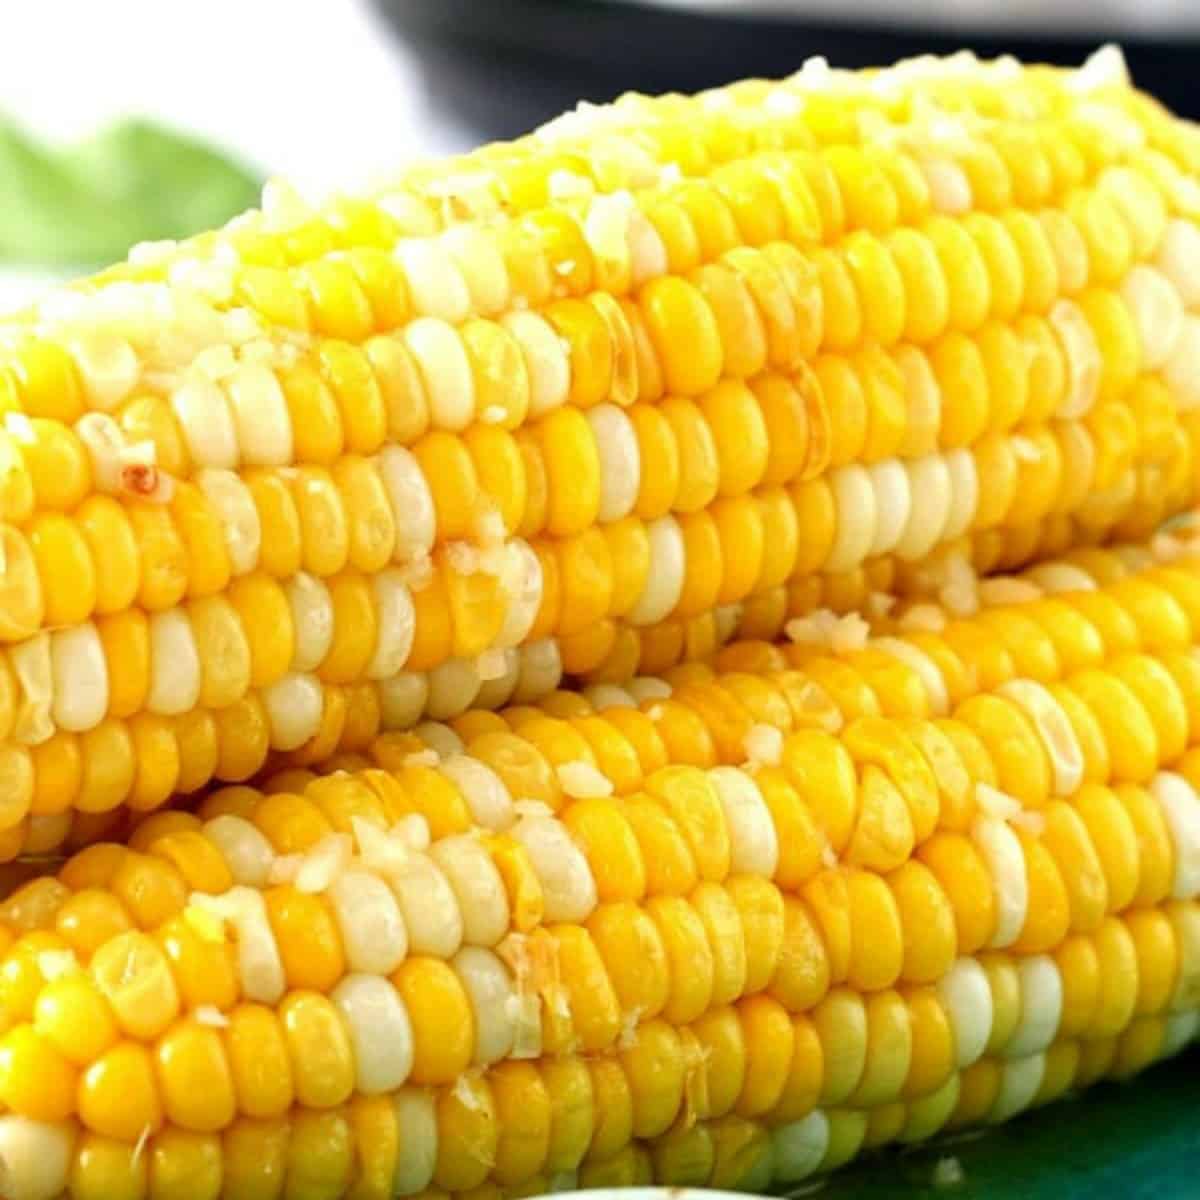 Corn on the cob on a plate.